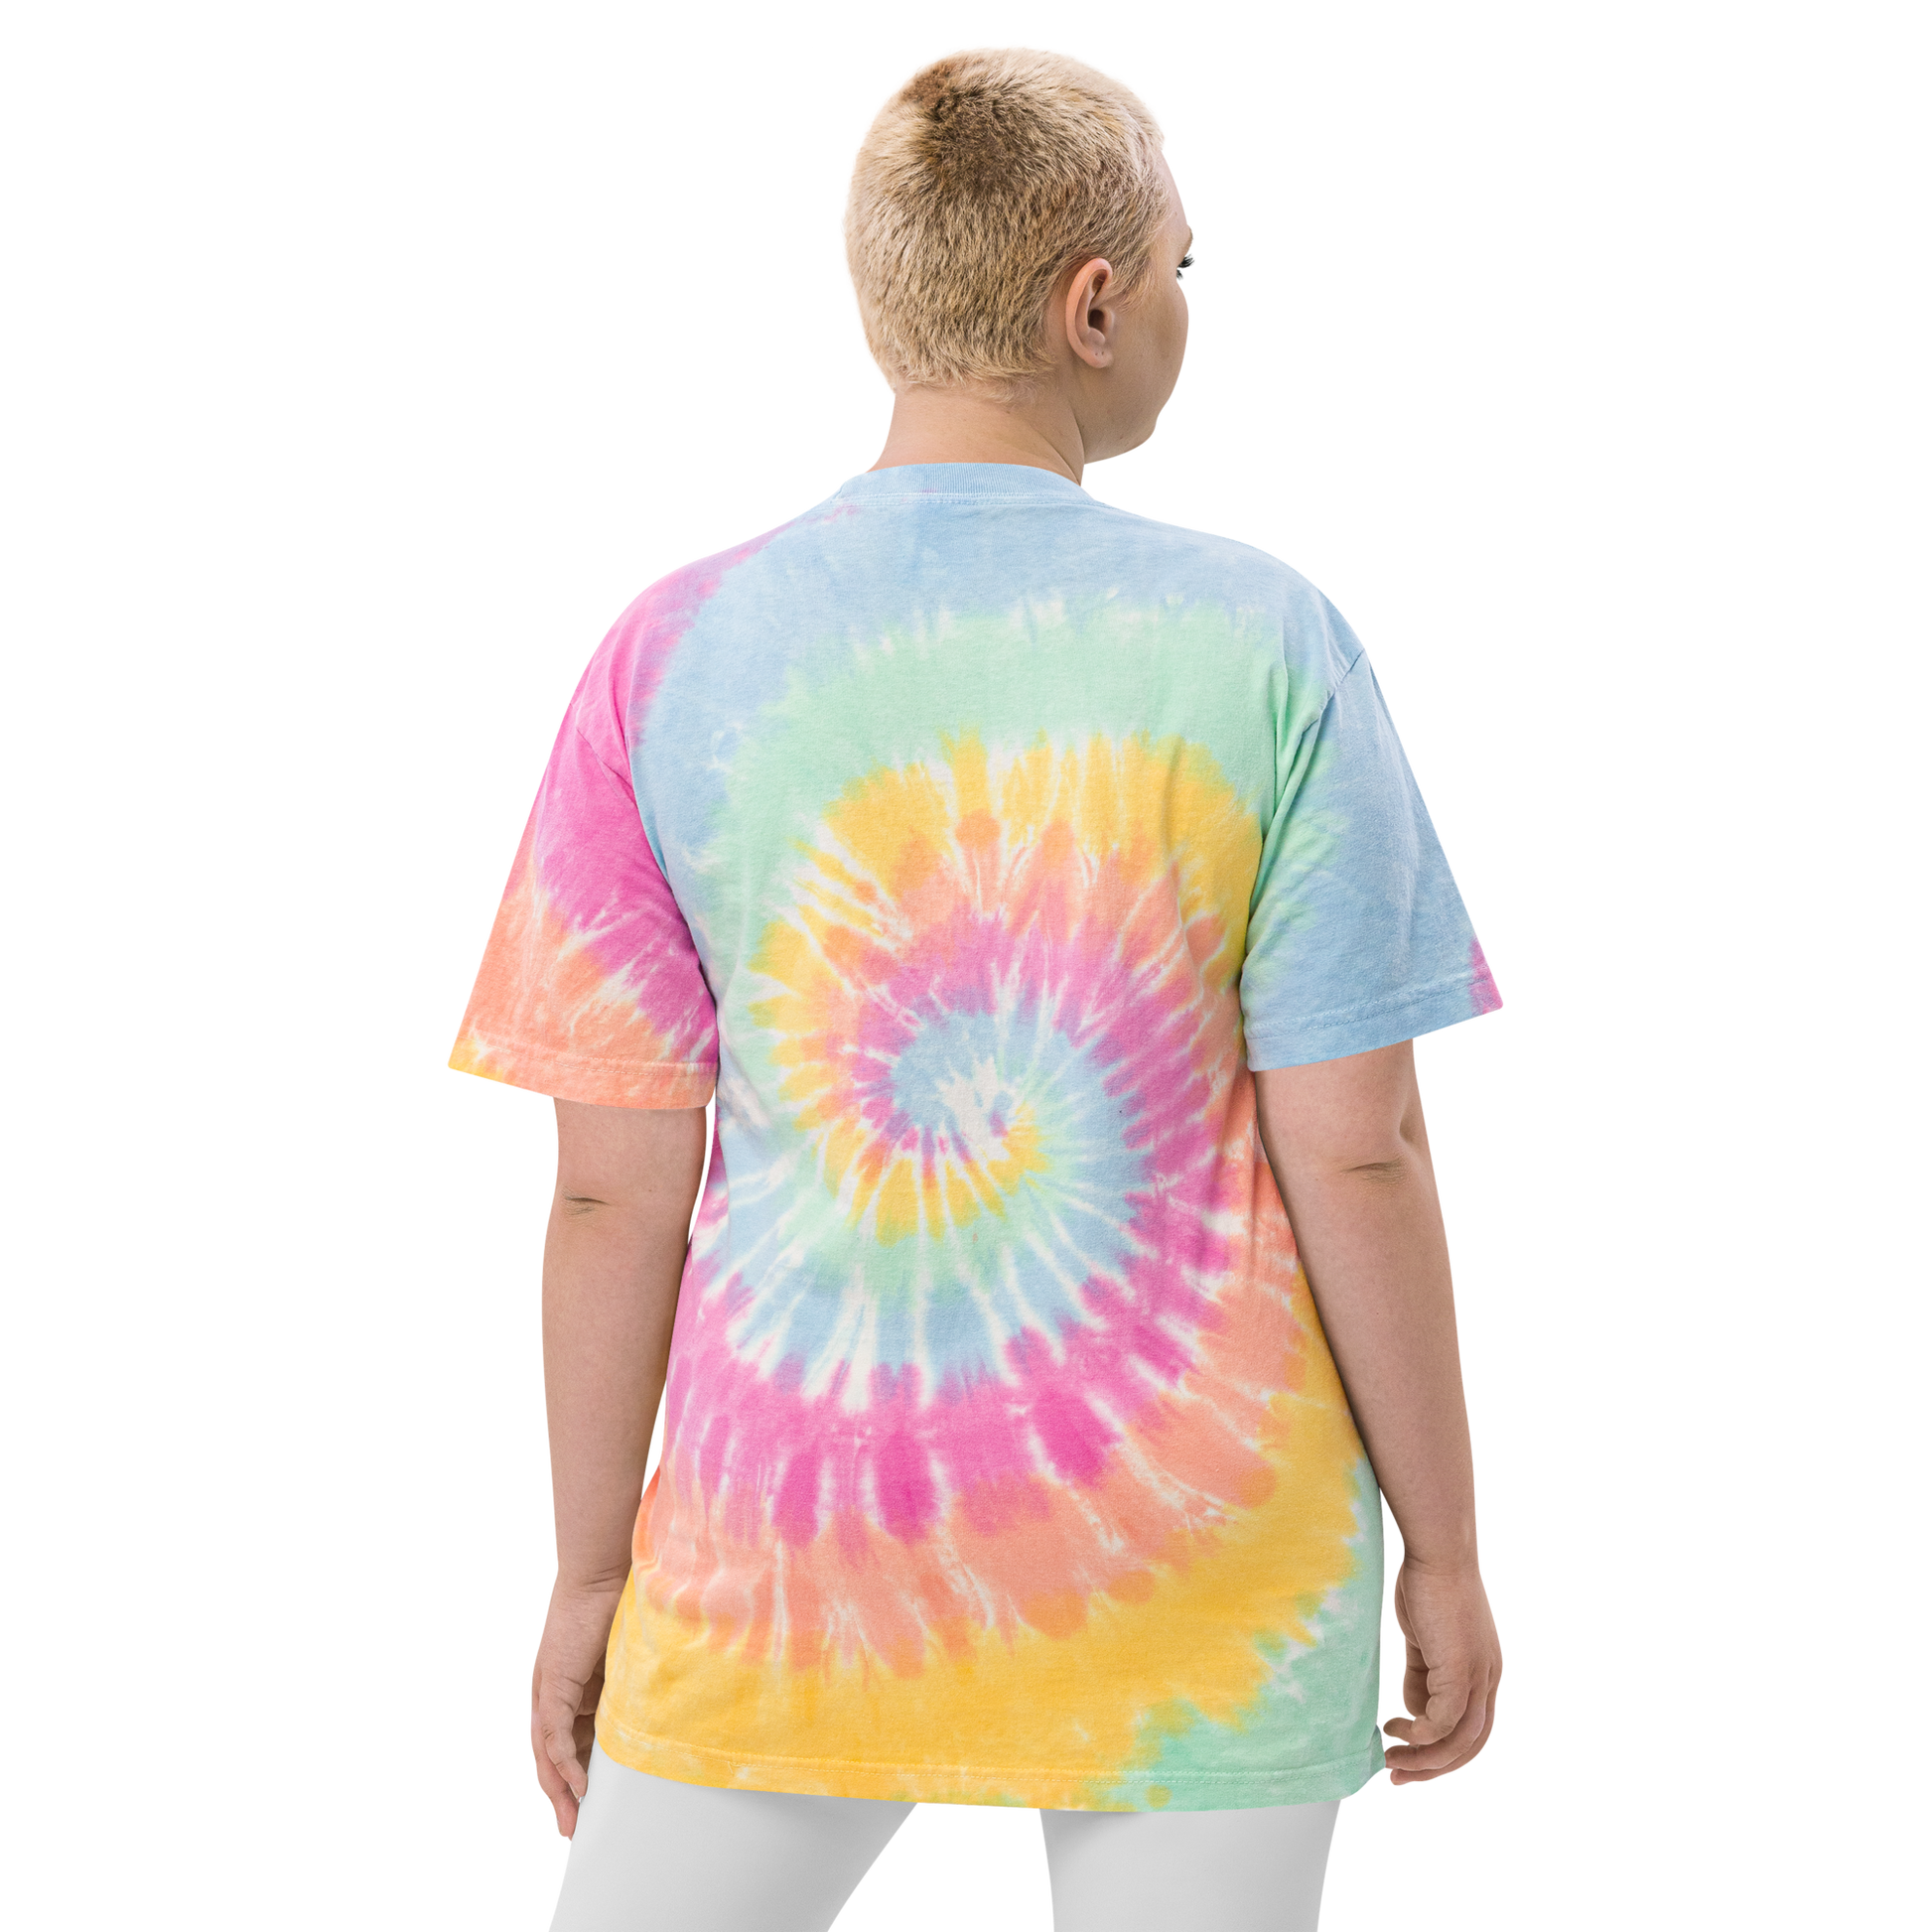 YHM Designs - YXE Saskatoon Oversized Tie-Dye T-Shirt - Crossed-X Design with Airport Code and Vintage Propliner - White Embroidery - Image 12